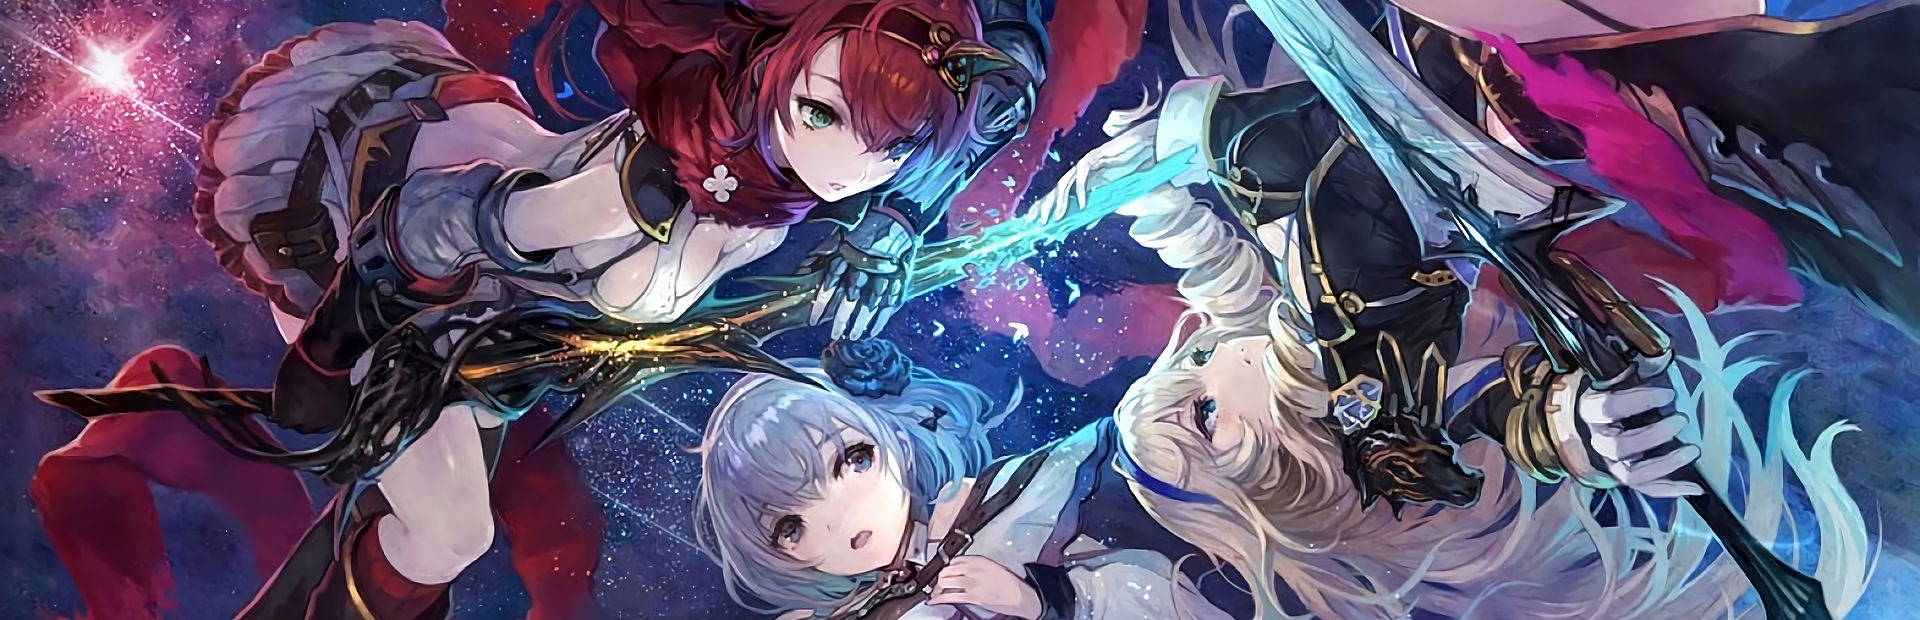 Banner Nights of Azure 2: Bride of the New Moon